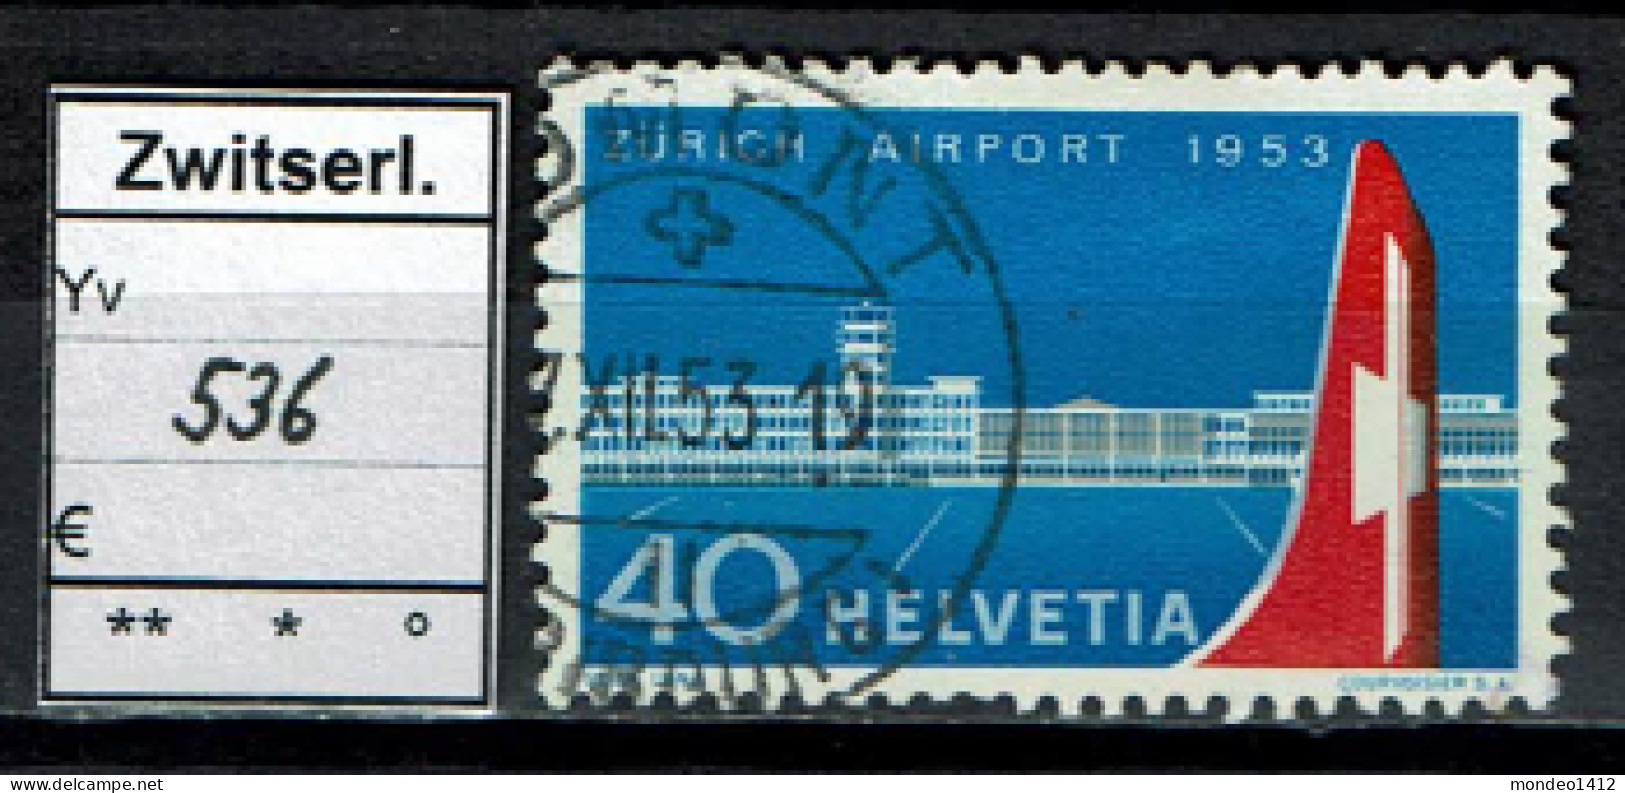 Suisse 1953 - YT 536 - Oblit. Used - Gebraucht